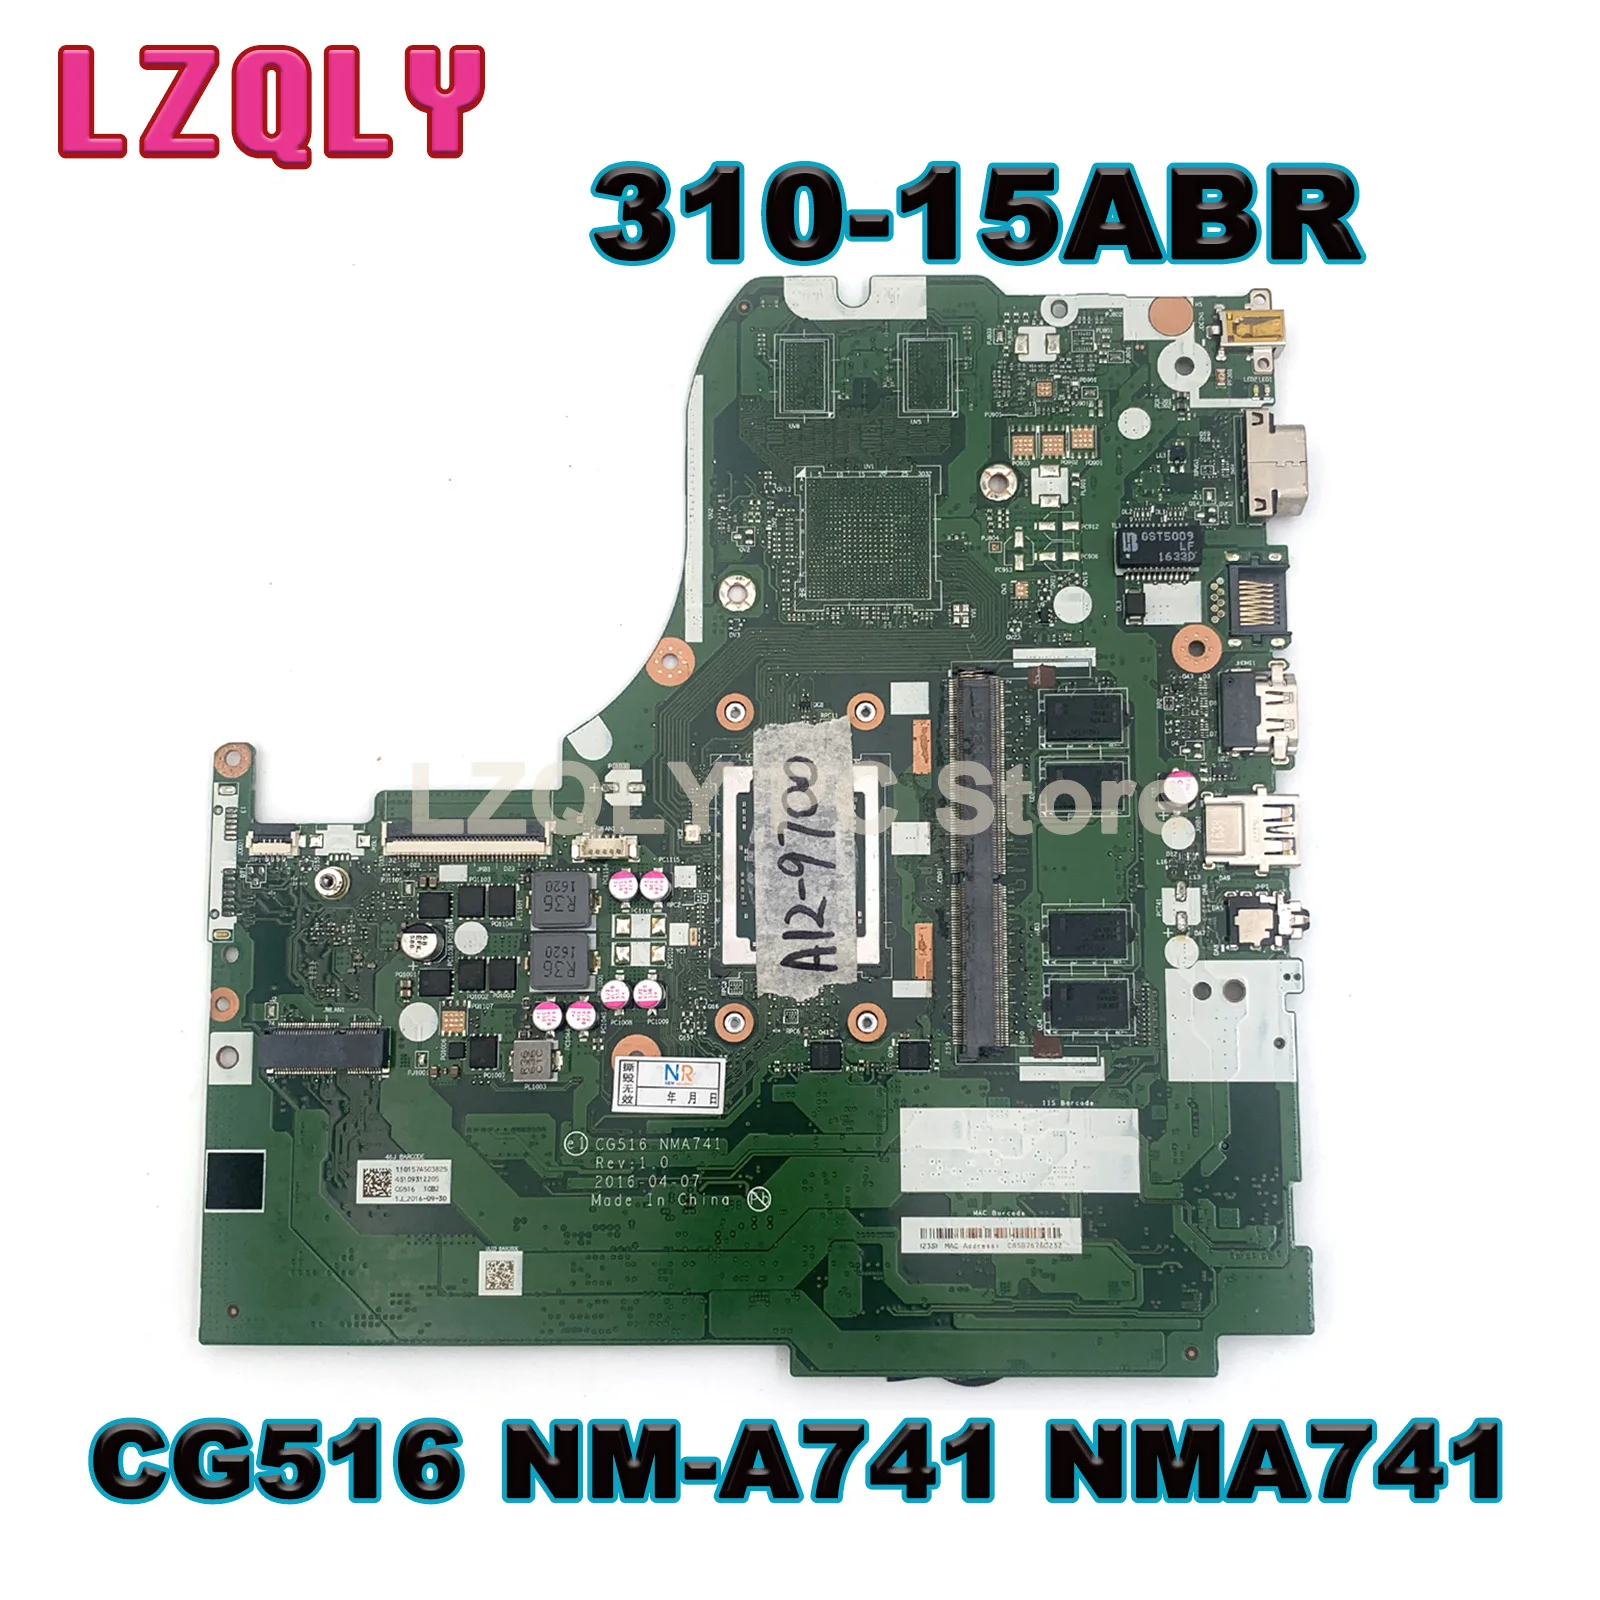 

For Lenovo IdeaPad 310-15ABR Laptop Motherboard CG516 NM-A741 NMA741 With A10-9600P A12-9700P FX9800P CPU 4GB RAM DDR4